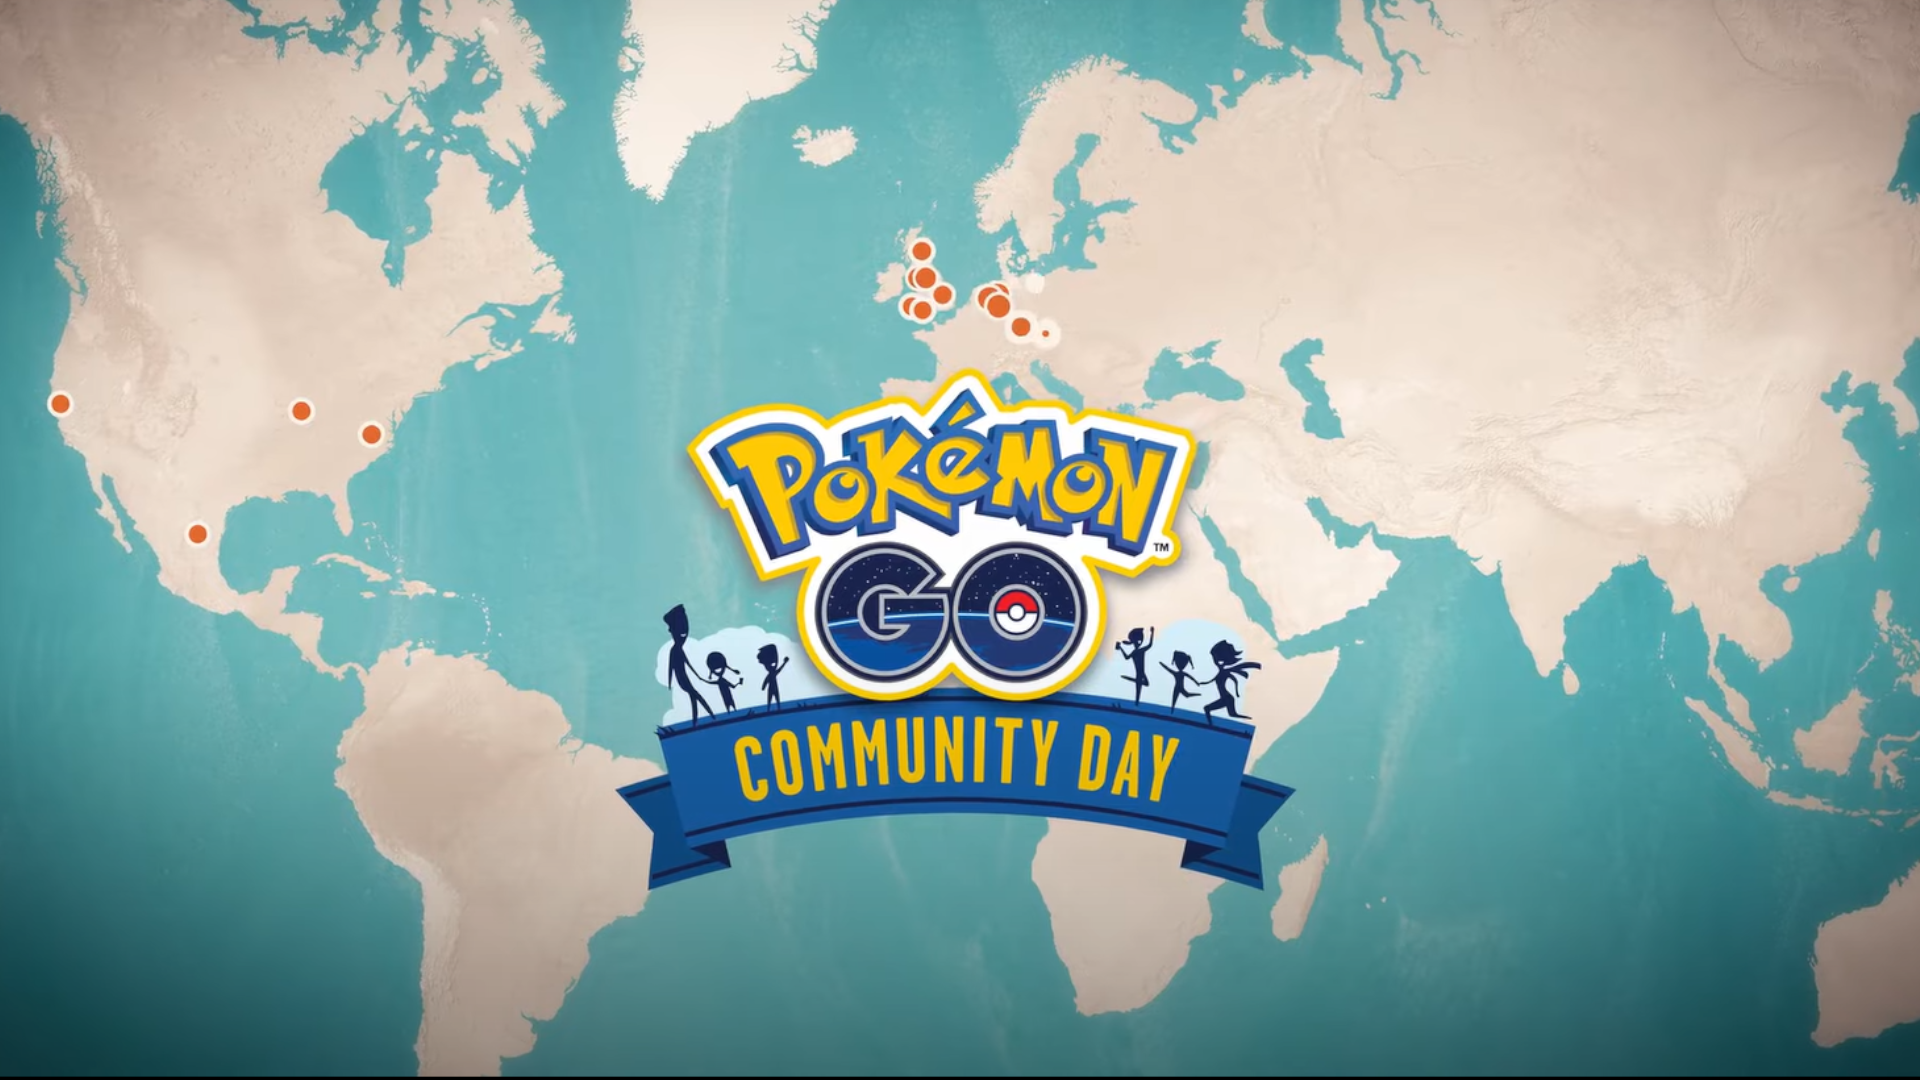 Pokémon Go Community days will force players outside and they're not